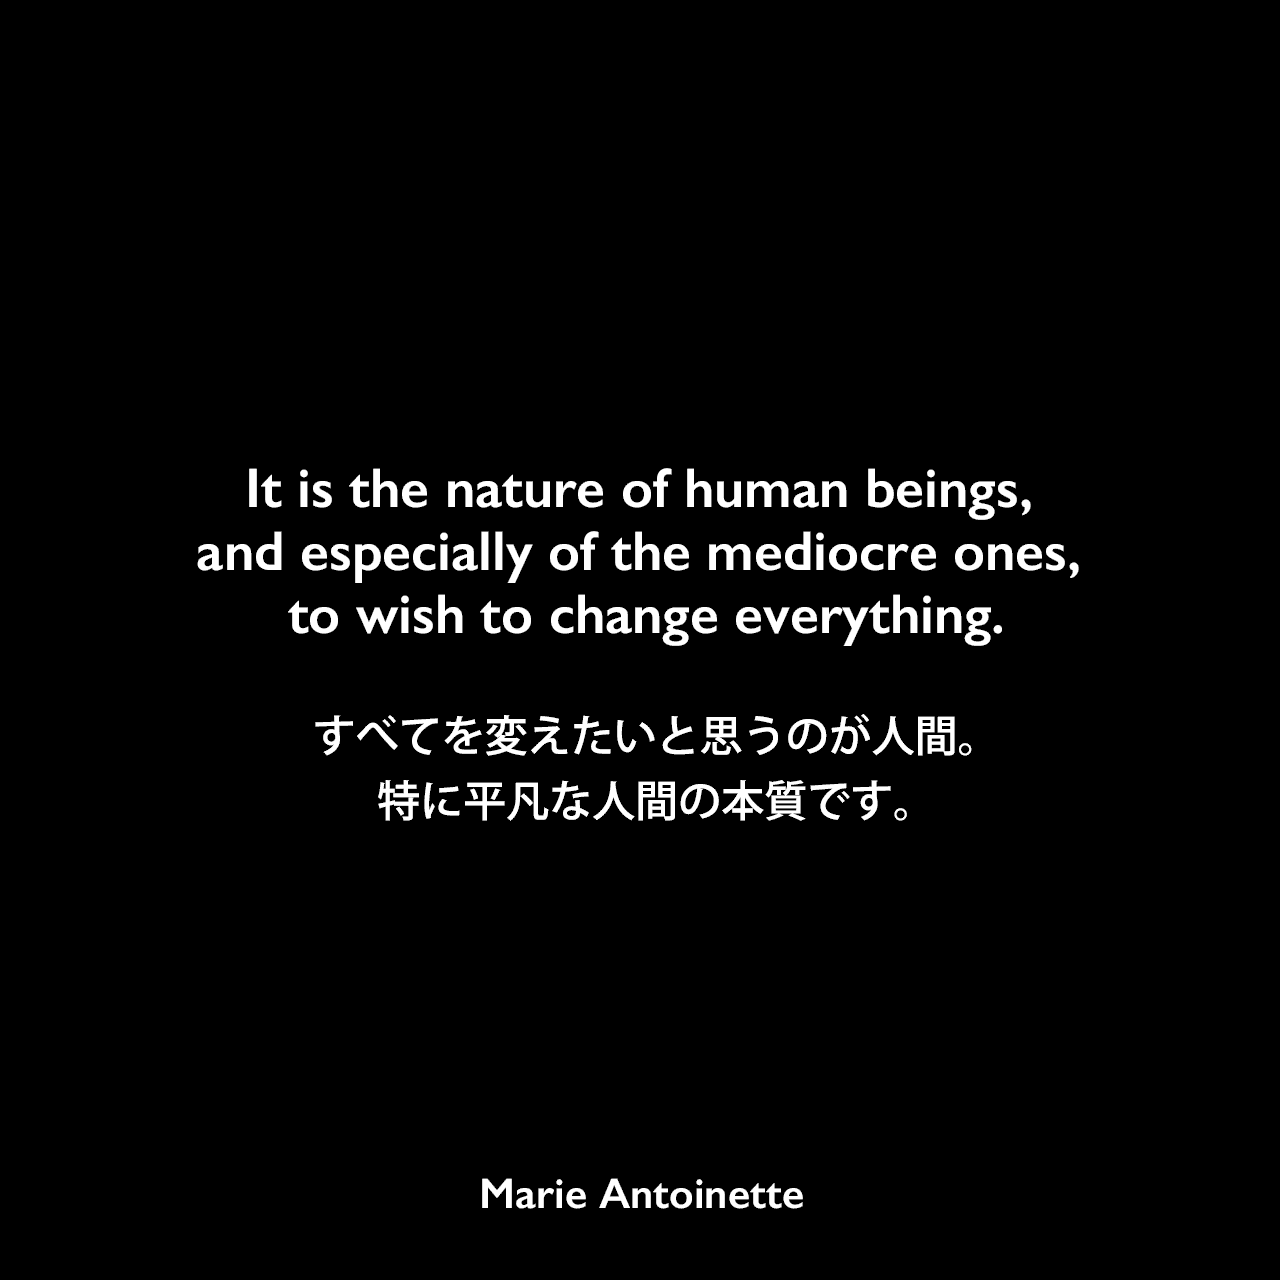 It is the nature of human beings, and especially of the mediocre ones, to wish to change everything.すべてを変えたいと思うのが人間。特に平凡な人間の本質です。Marie Antoinette